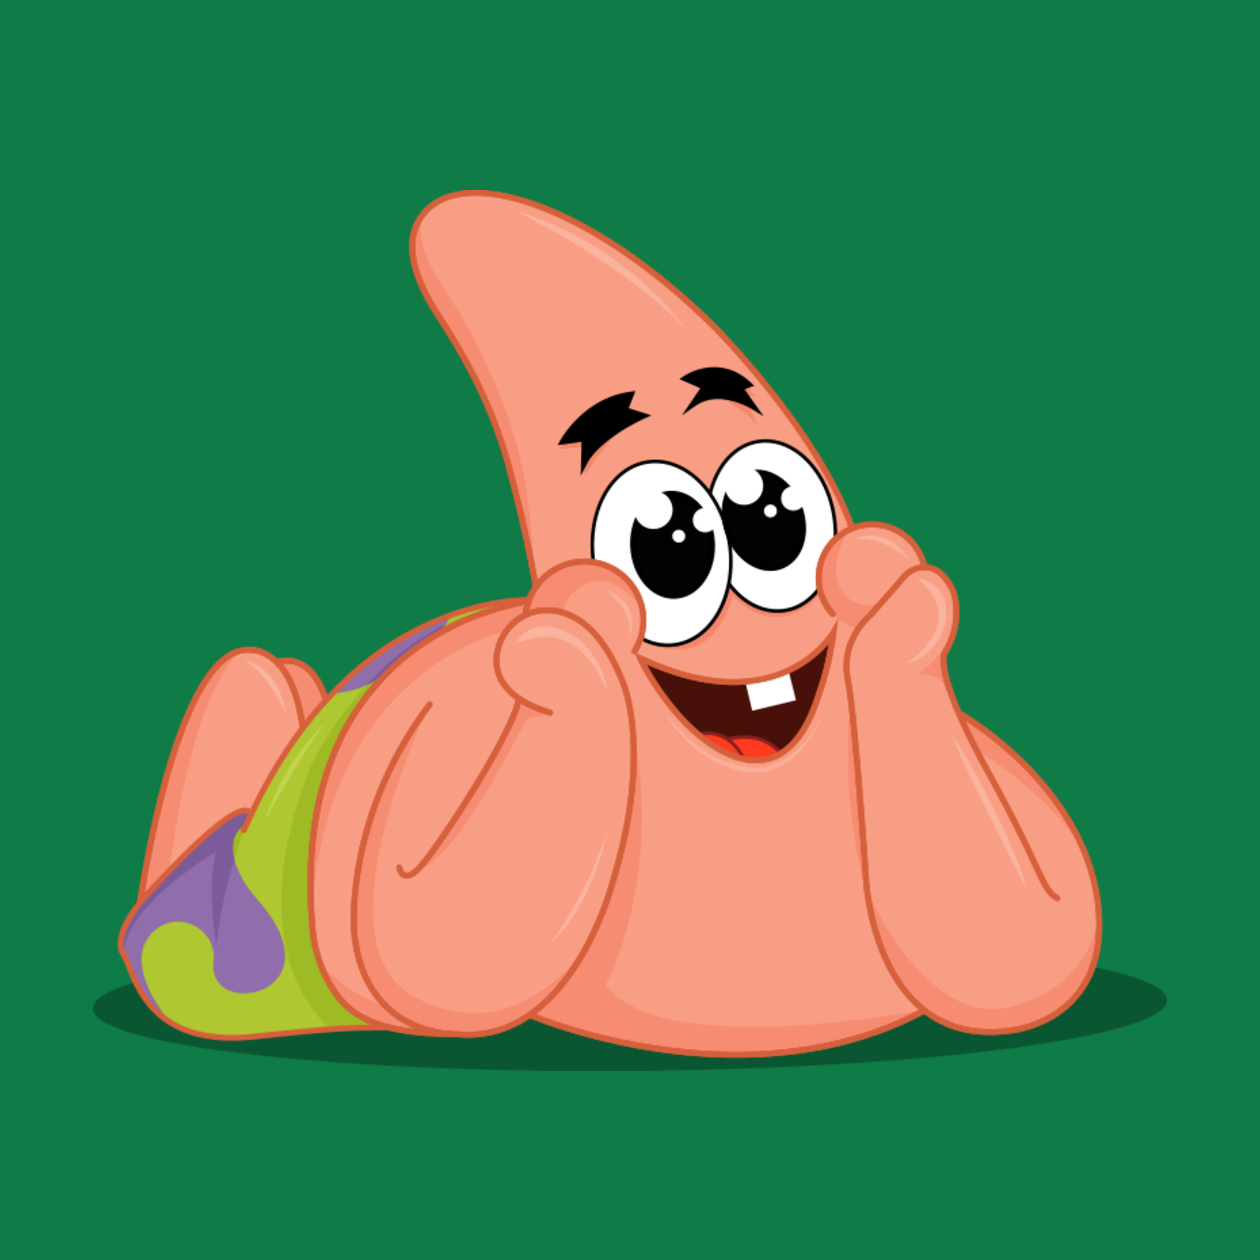 Patrick Star,Patrick Star Best Picture For funny photo laughing For Your .....